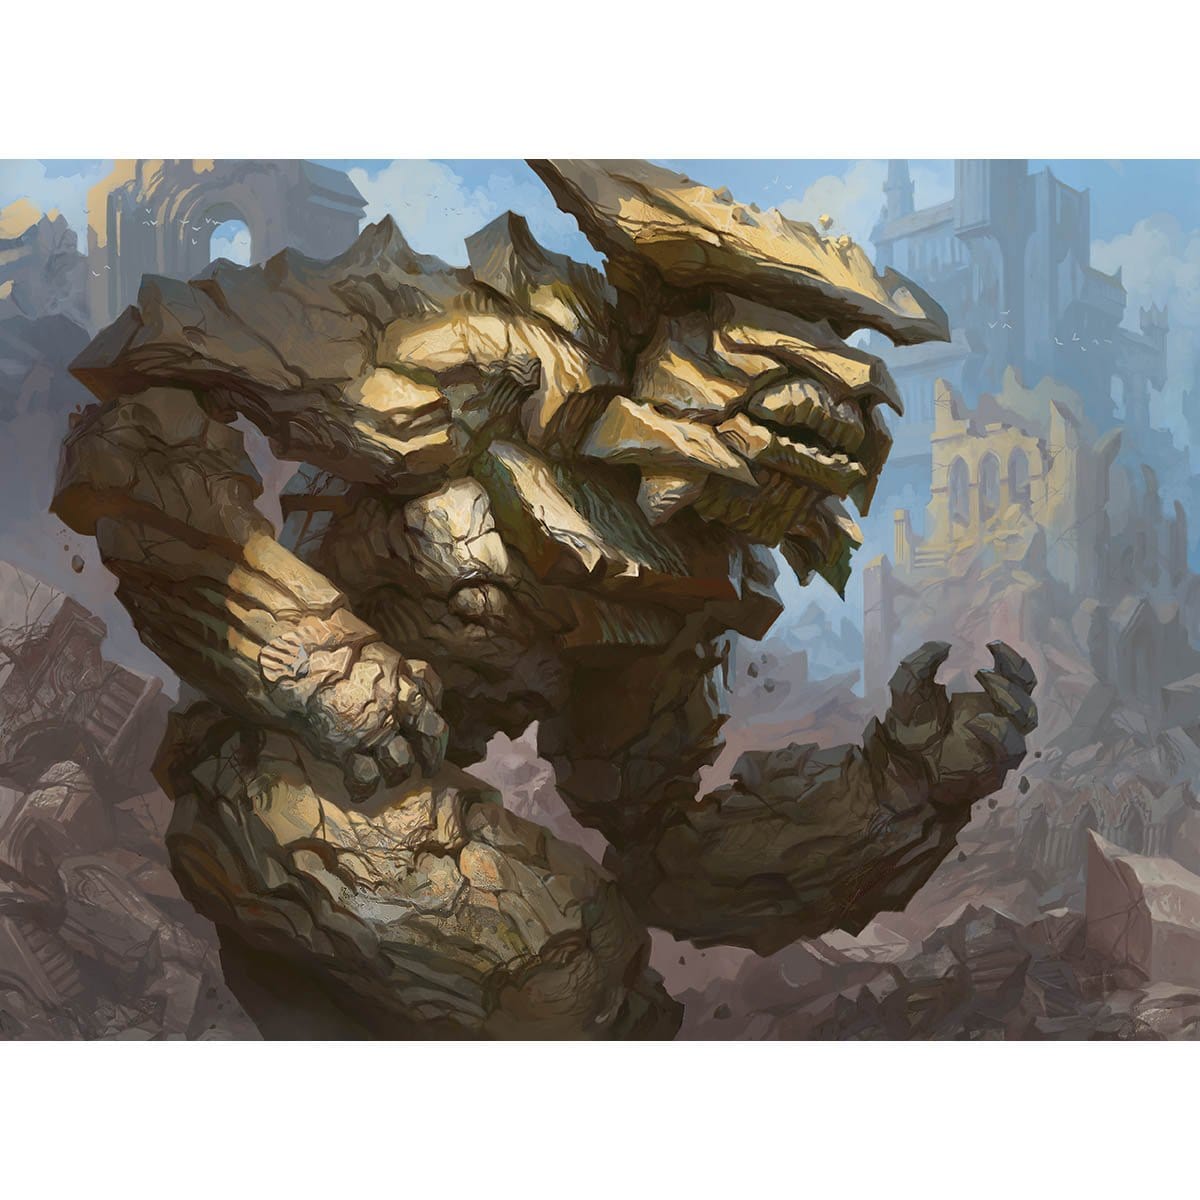 Rumbling Ruin Print - Print - Original Magic Art - Accessories for Magic the Gathering and other card games